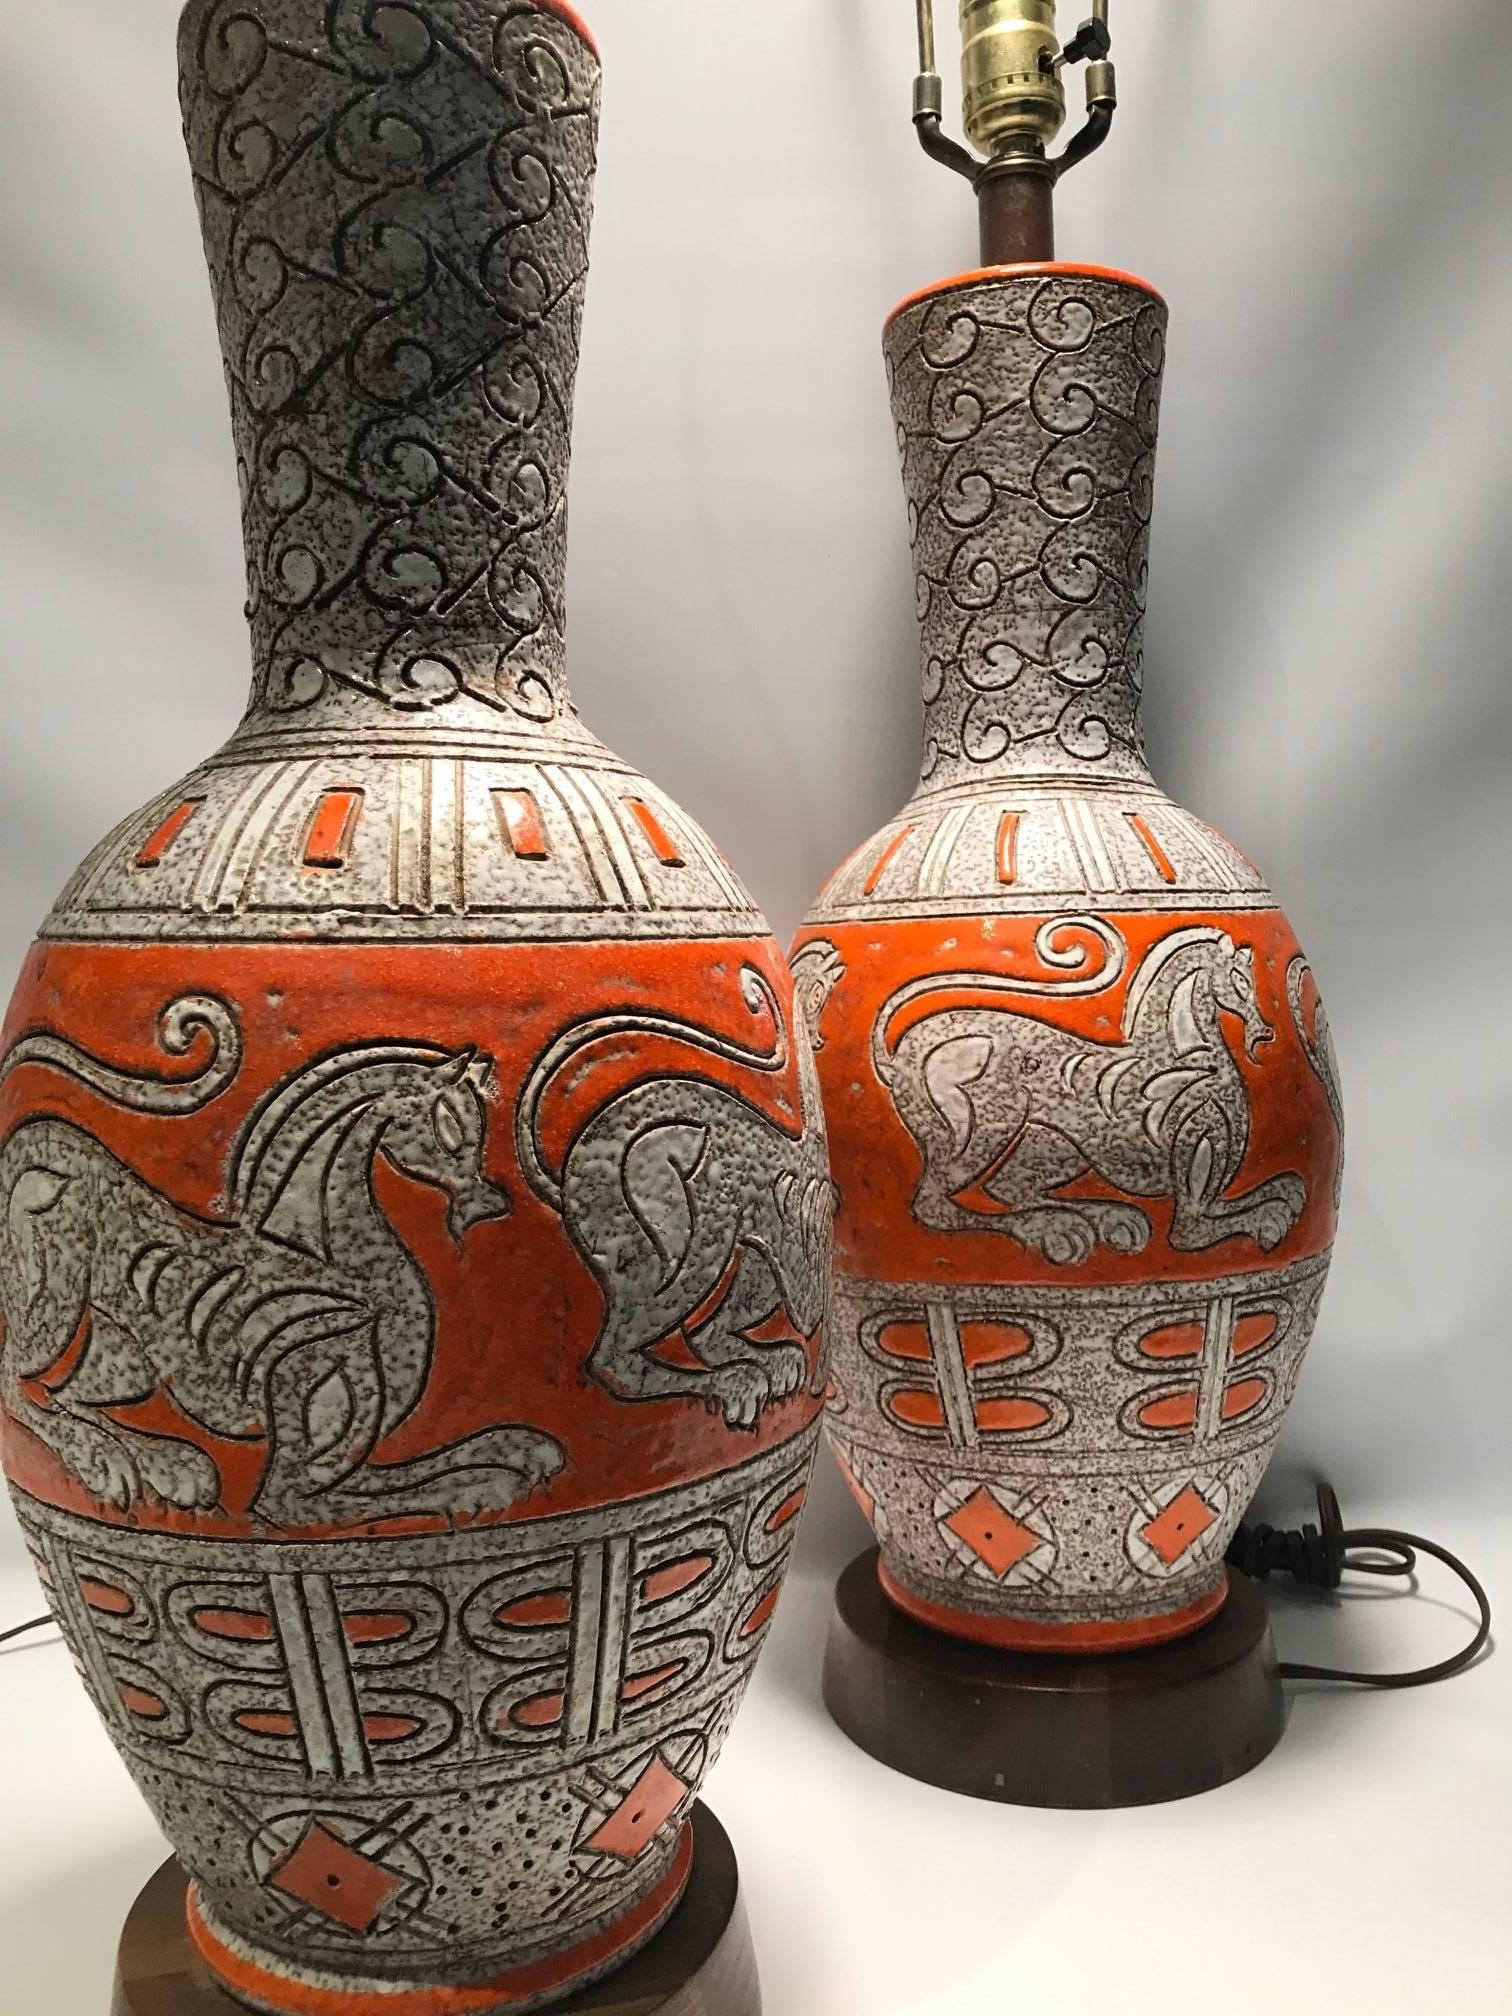 Pair of Mid-Century Italian orange and dappled light brown and grey ground glazed ceramic lamps with incised chimera mythological animal like decoration and abstract motifs, each on a turned wooden base. Electrified for the US. Harp and finial and